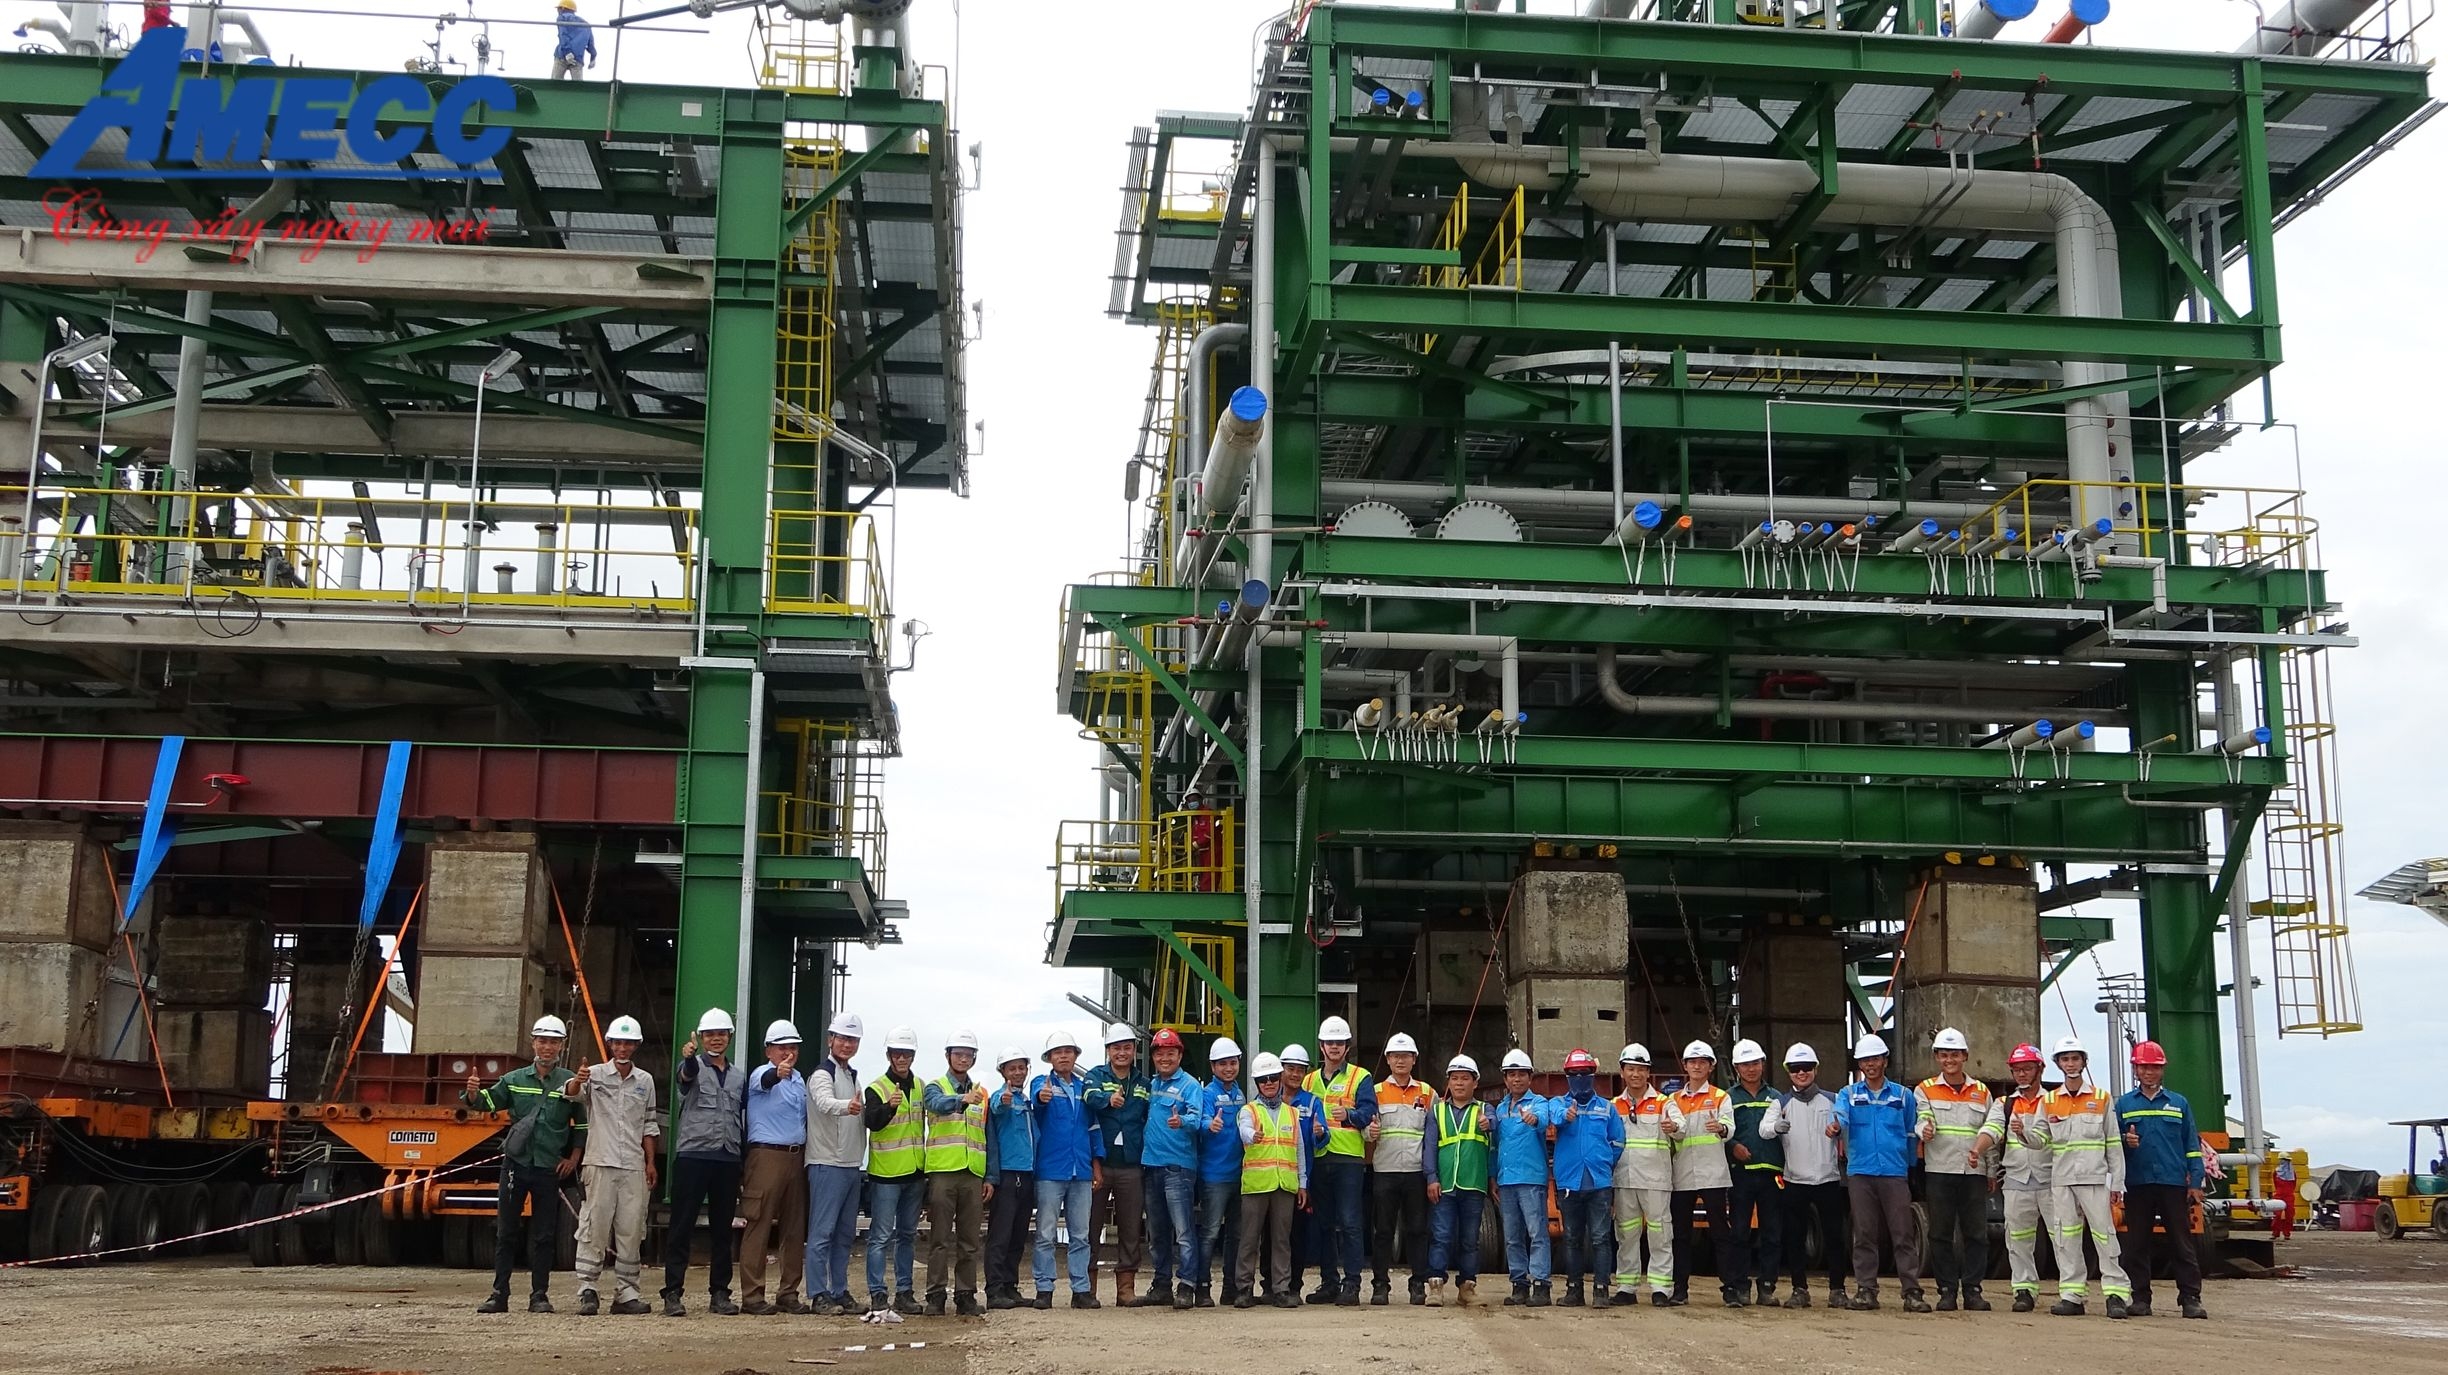 AMECC - LAUNCHING MODULES 1, 2 - LONG SON PETROCHEMICAL COMPLEX PROJECT